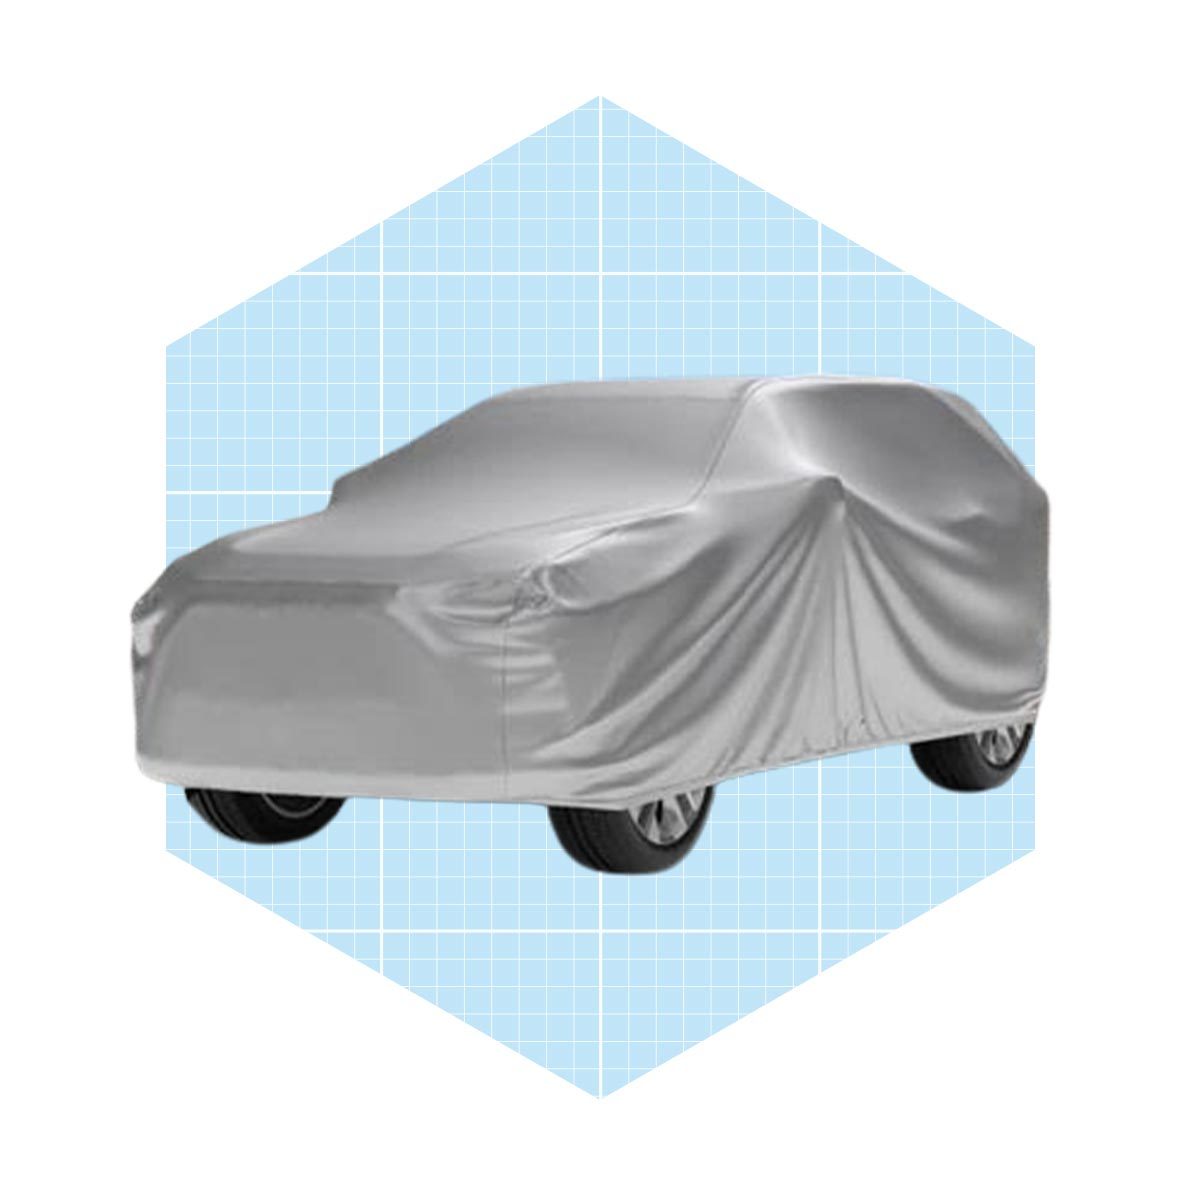 Autocar product test: What car cover is best?